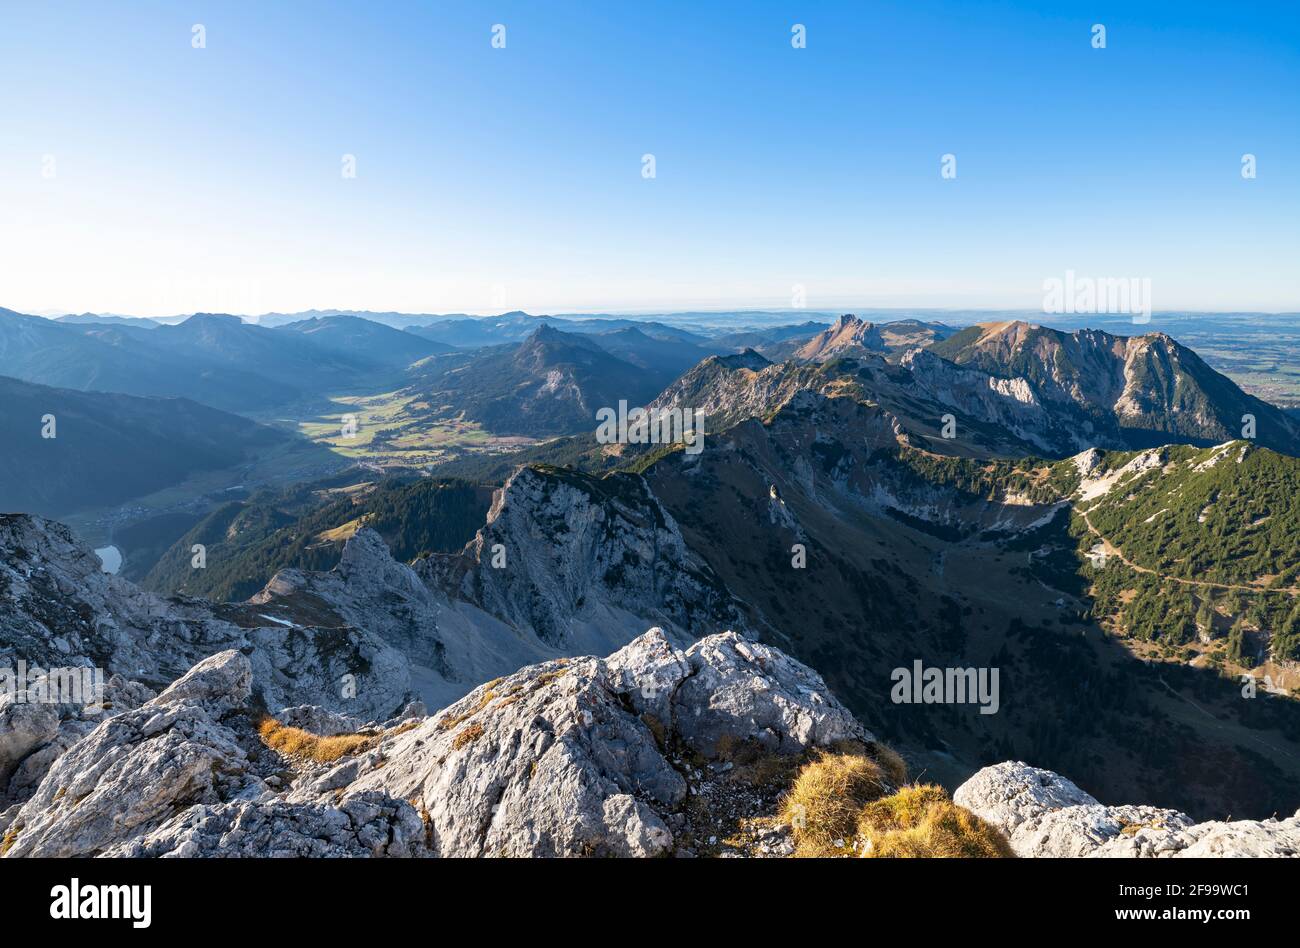 Alpine mountain landscape on a sunny autumn day. View from Gimpel to the mountains over the Tannheimer Tal with Aggenstein and Füssener Jöchle. Allgäu Alps, Tyrol, Austria, Europe Stock Photo